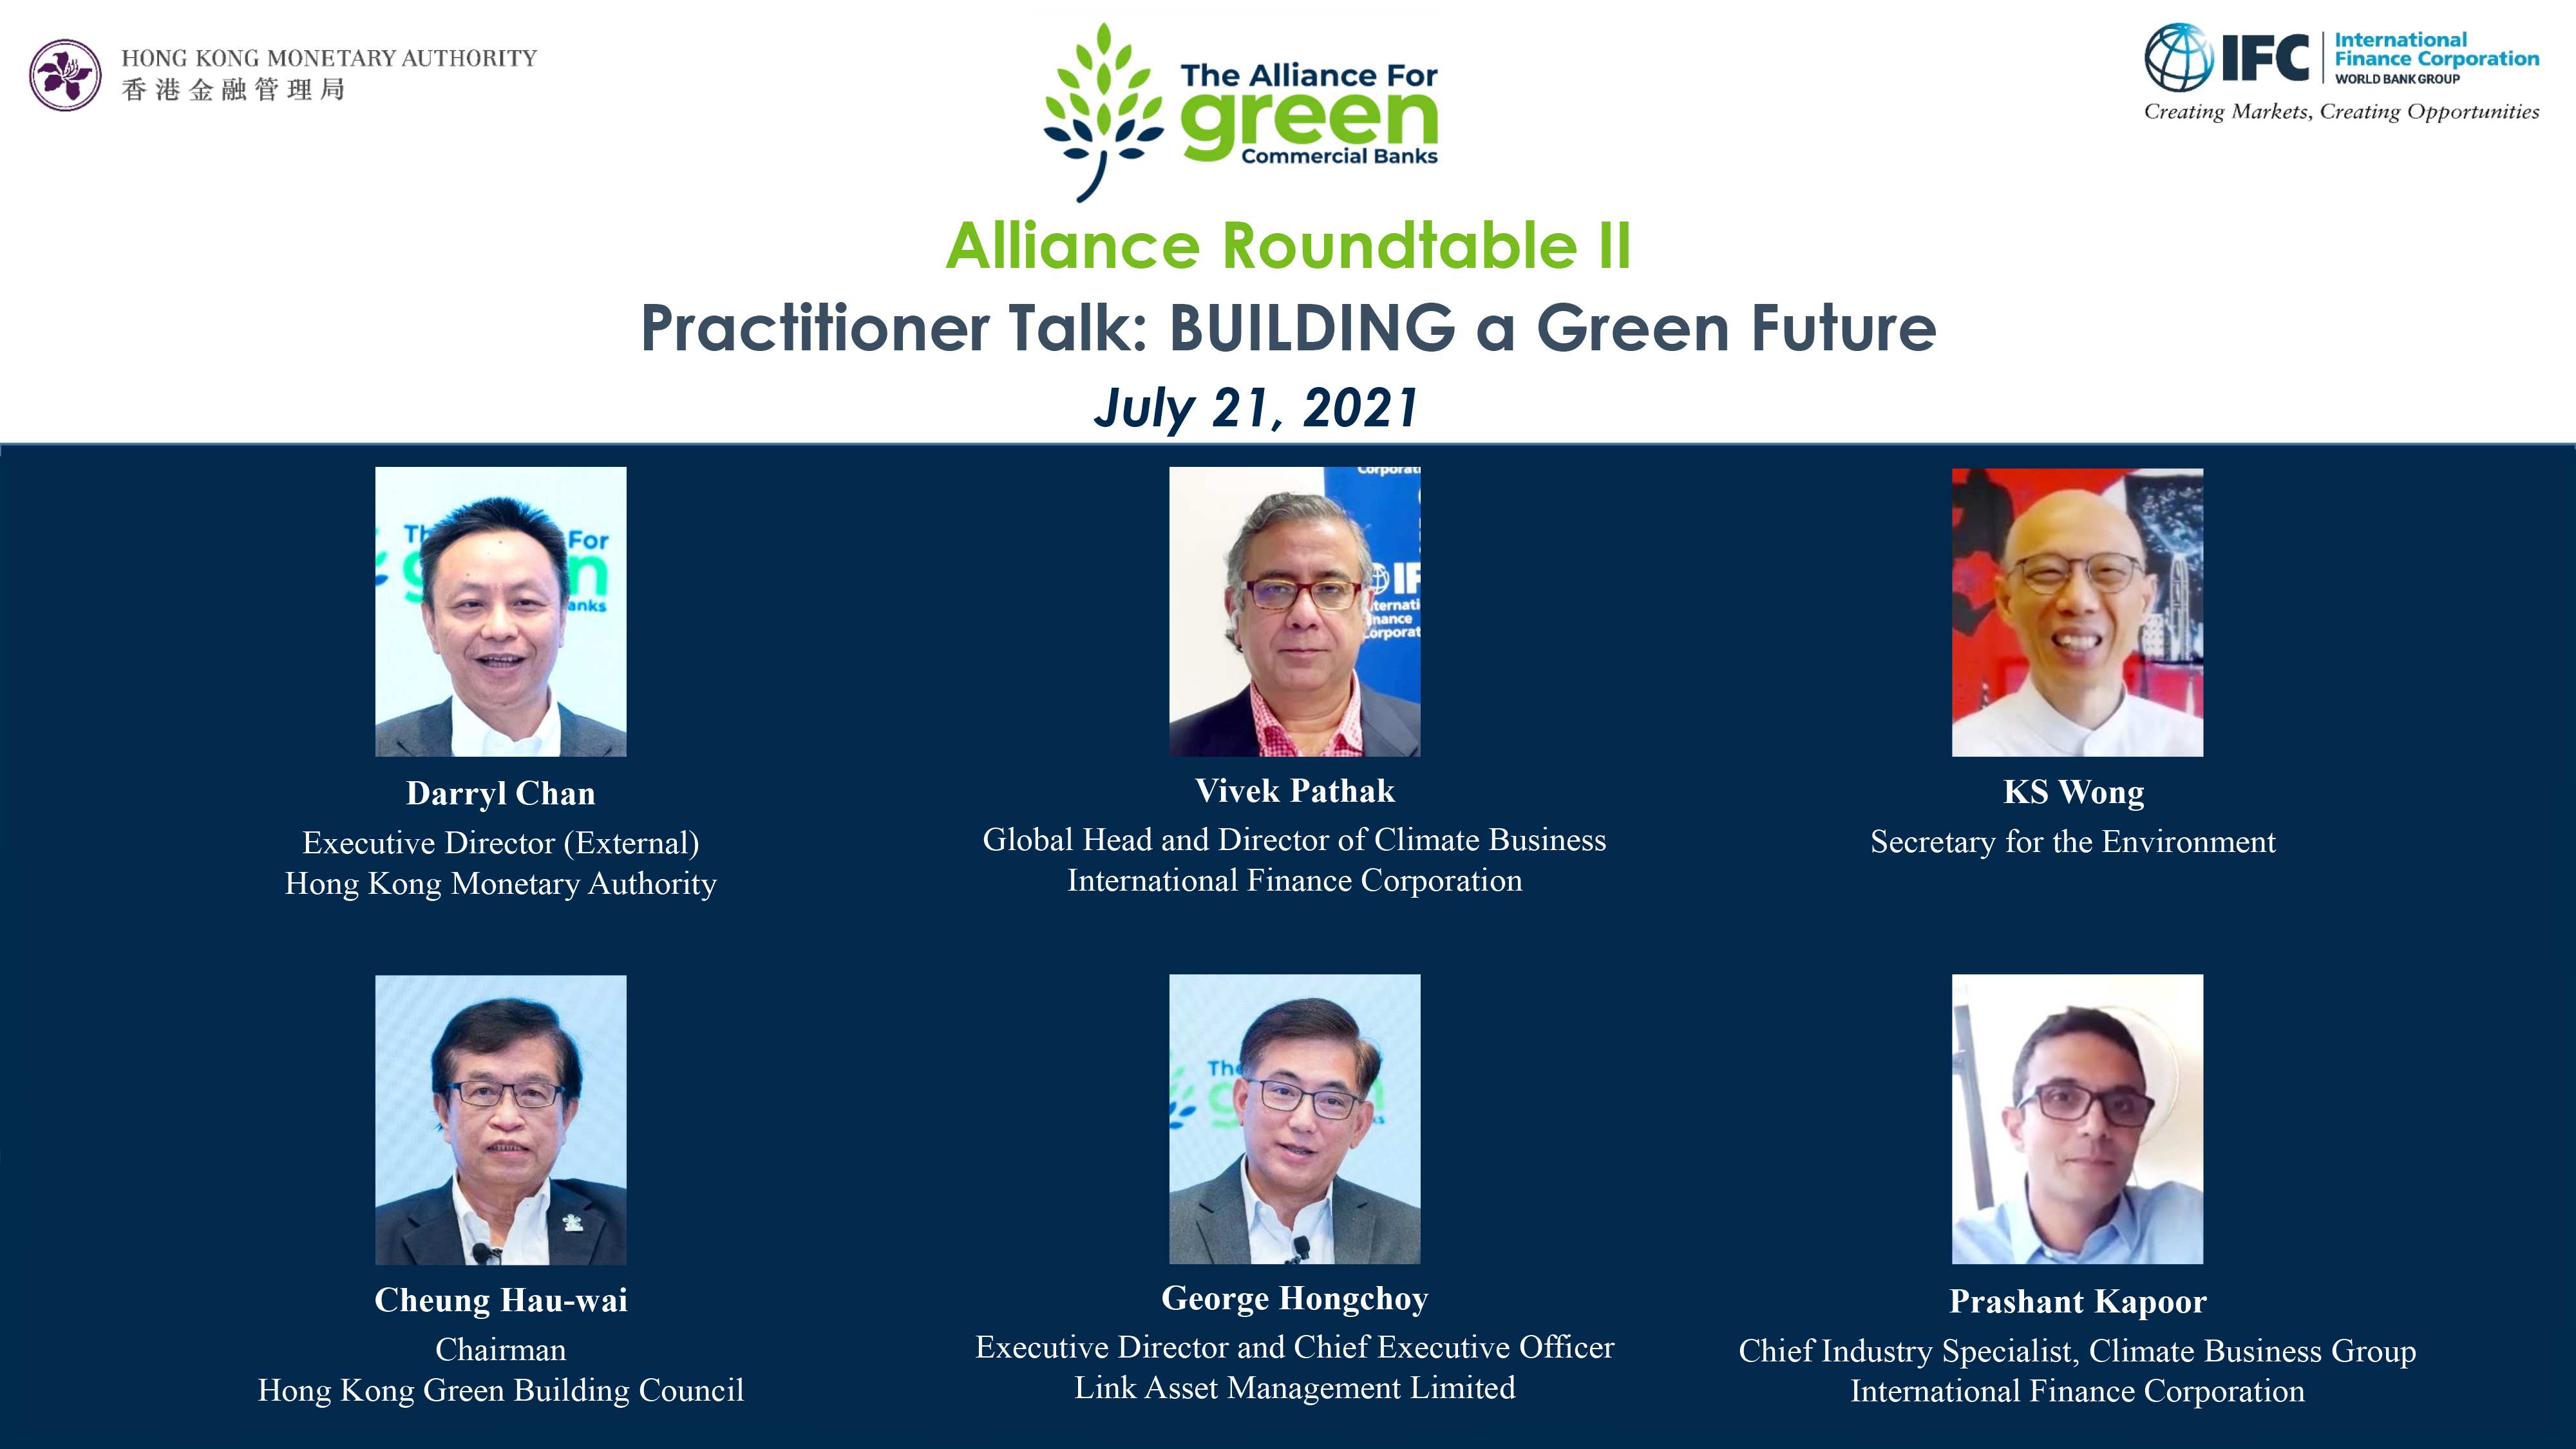 The Alliance for Green Commercial Banks hosts the roundtable “Practitioner Talk: BUILDING a Green Future”, virtually today (21 July). The event commences with opening remarks from Mr Vivek Pathak, Global Head and Director of Climate Business, IFC (top centre); and a keynote address by Mr KS Wong, Secretary for the Environment (top right). The panel discussion is moderated by Mr Darryl Chan, Executive Director (External) of the HKMA (top left), and is joined by Mr Cheung Hau-wai, Chairman, Hong Kong Green Building Council (bottom left); Mr George Hongchoy, Executive Director and Chief Executive Officer, Link Asset Management Limited (bottom centre); and Mr Prashant Kapoor, Chief Industry Specialist, Climate Business Group, IFC (bottom right).